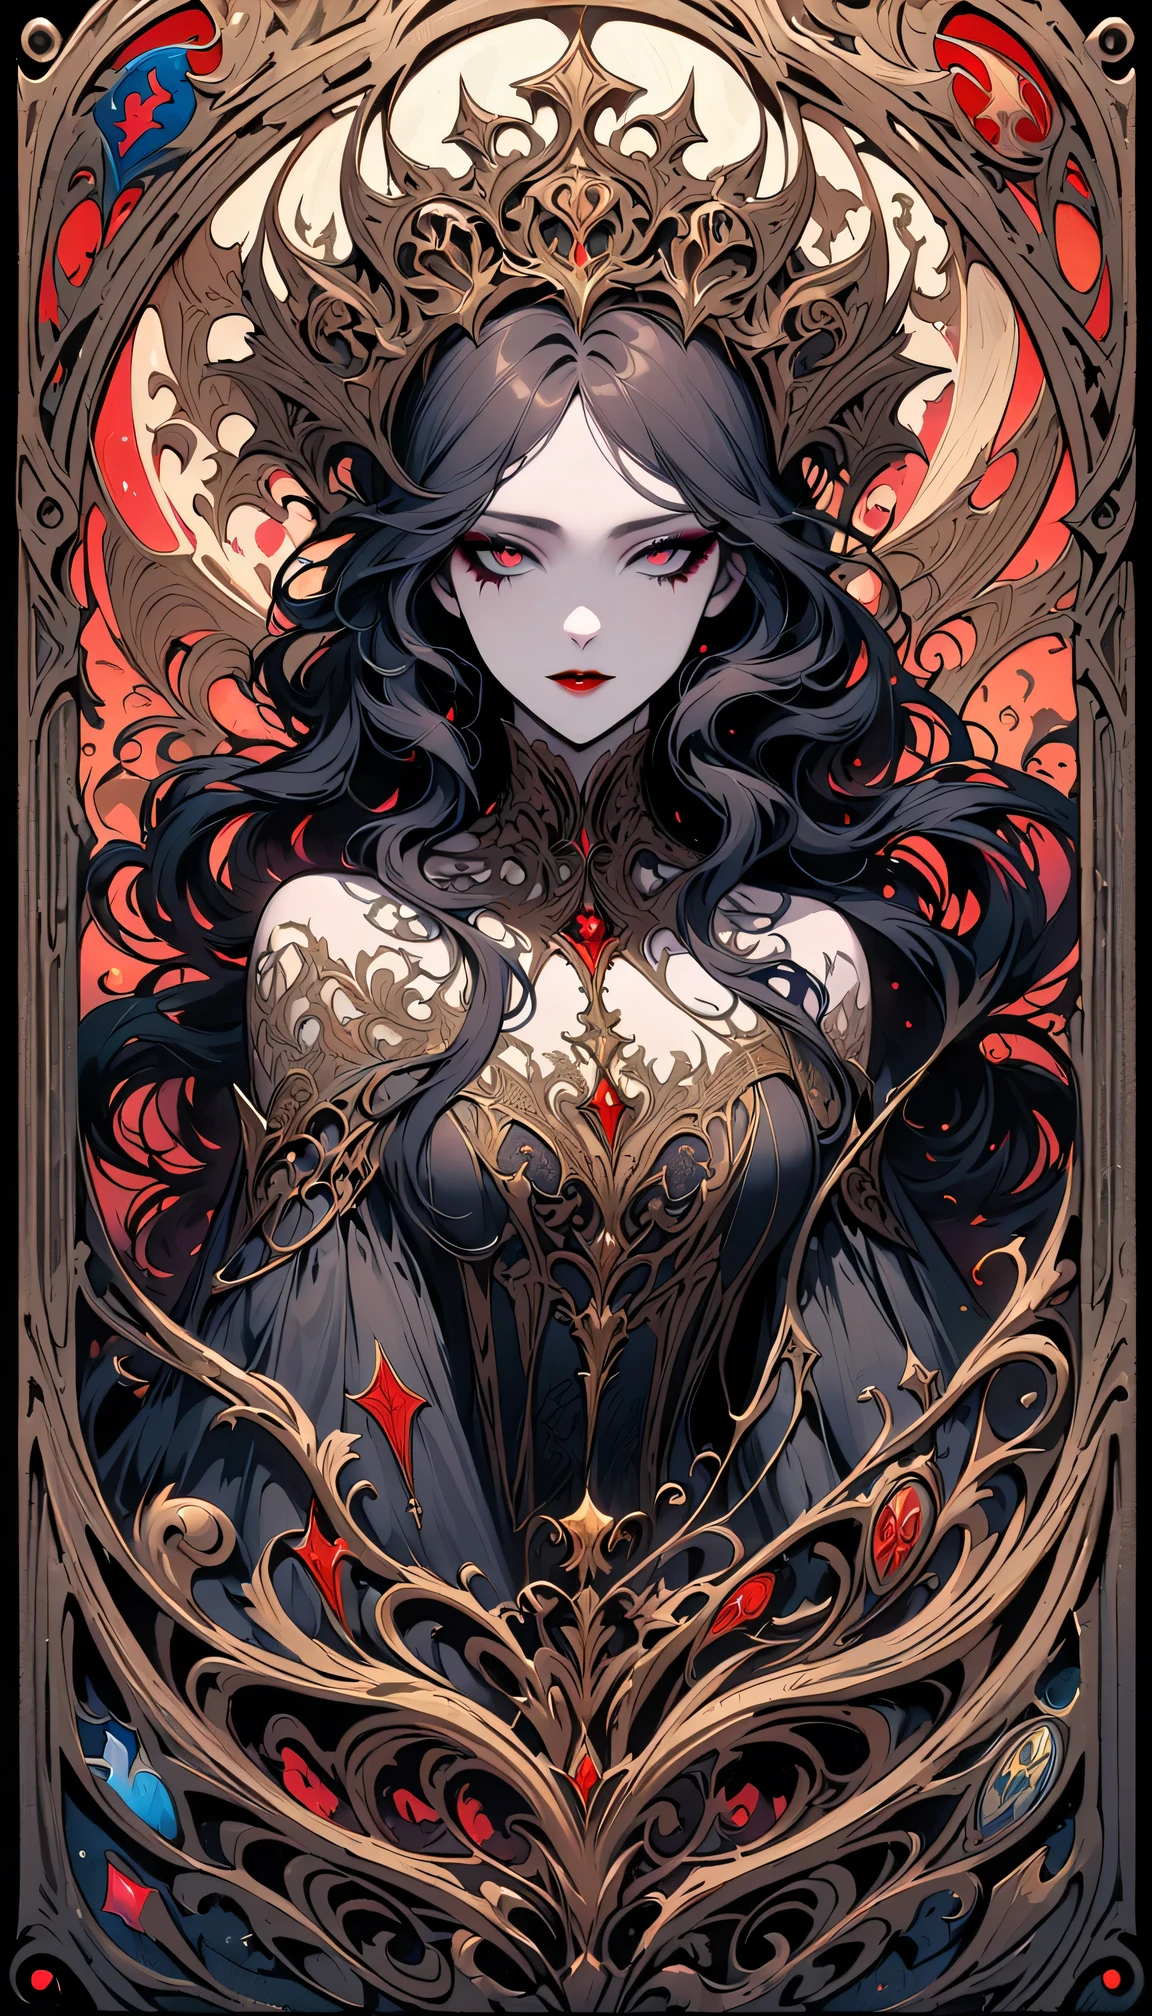 Tarot card: Mad Queen,dark fantasy,hauntingly beautiful,vivid colors,gothic horror,macabre atmosphere,fluid strokes,great attention to detail,fine linework,elaborately designed tarot card with intricate patterns,creepy and mesmerizing,richly textured,dramatic lighting,mysterious aura,distinctive style,exquisite artwork,shadowy background,mystical symbols,emotive expression,captivating gaze,feathered headdress,pale complexion,demonic features,long flowing hair with twisted strands,smoky eye makeup,intriguingly distorted face,dripping blood-red lipstick,ominous creatures lurking in the shadows,ethereal mist adding an otherworldly touch,moody tones enhancing the somber mood,impressive visual impact,foreboding vibe.